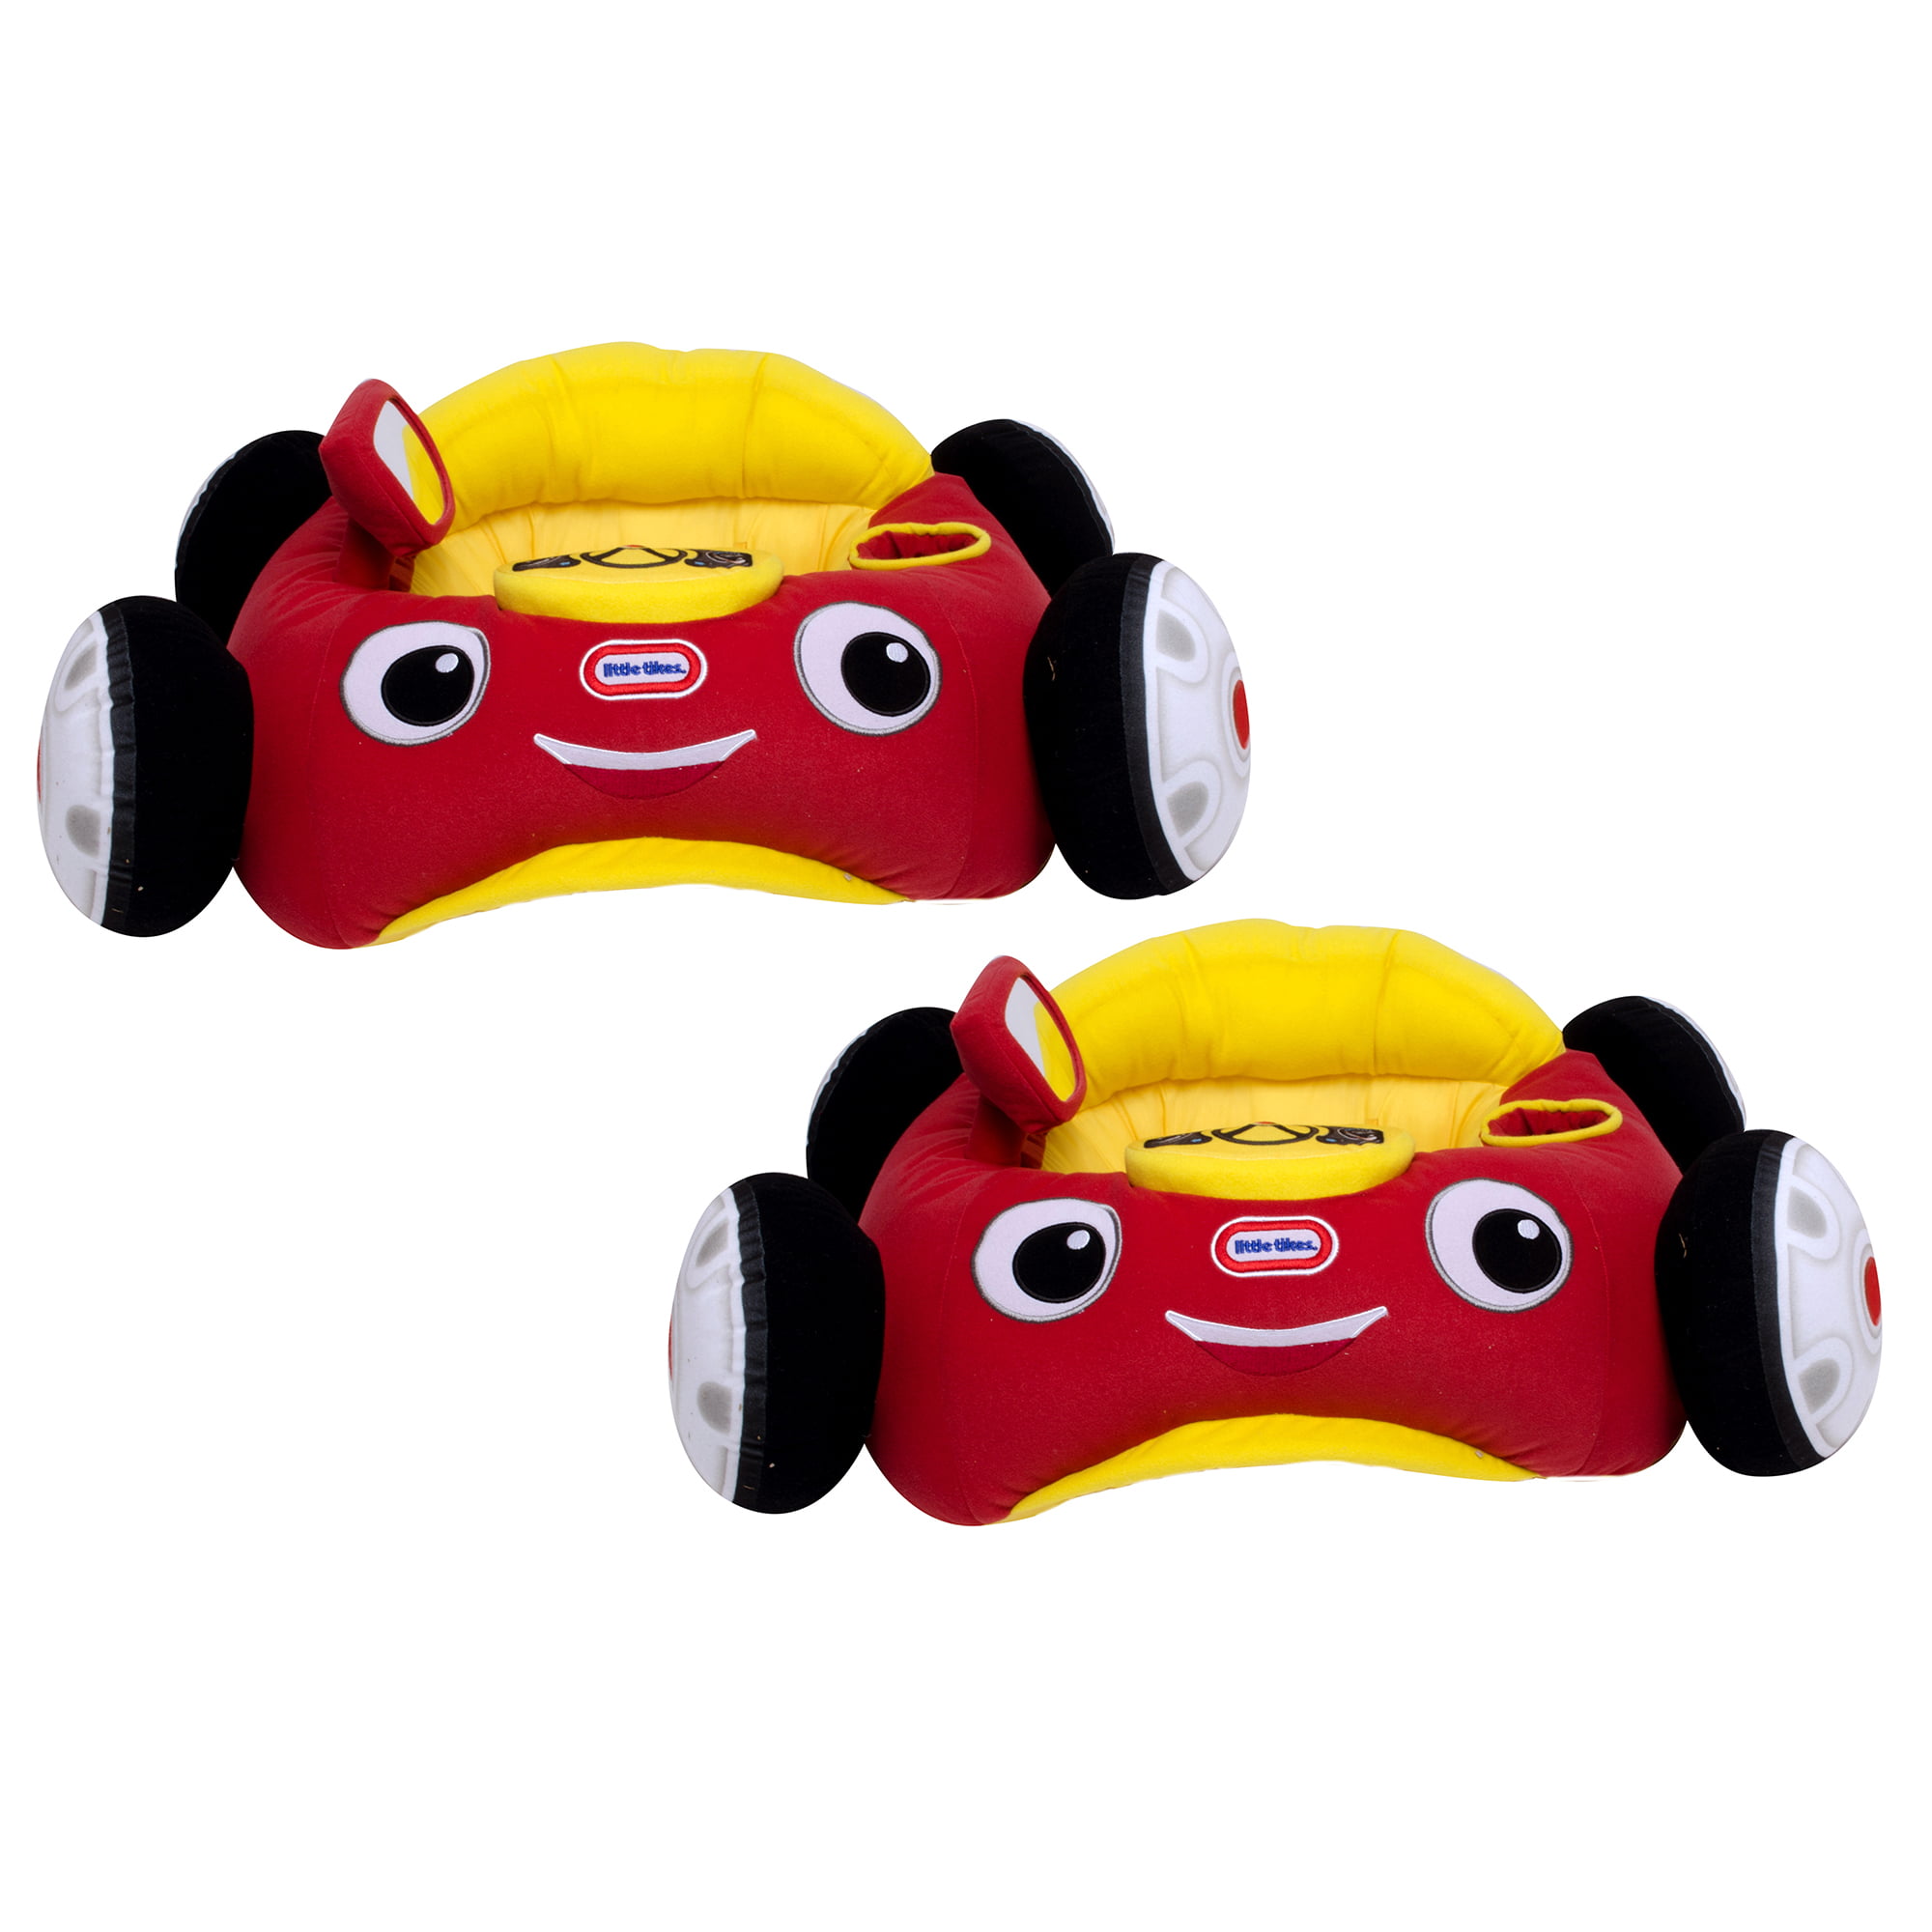 Invloed Egypte Inzet Little Tikes Cozy Coupe Plush Baby Toddler Lounger Floor Seat, Red Car (2  Pack) - Walmart.com